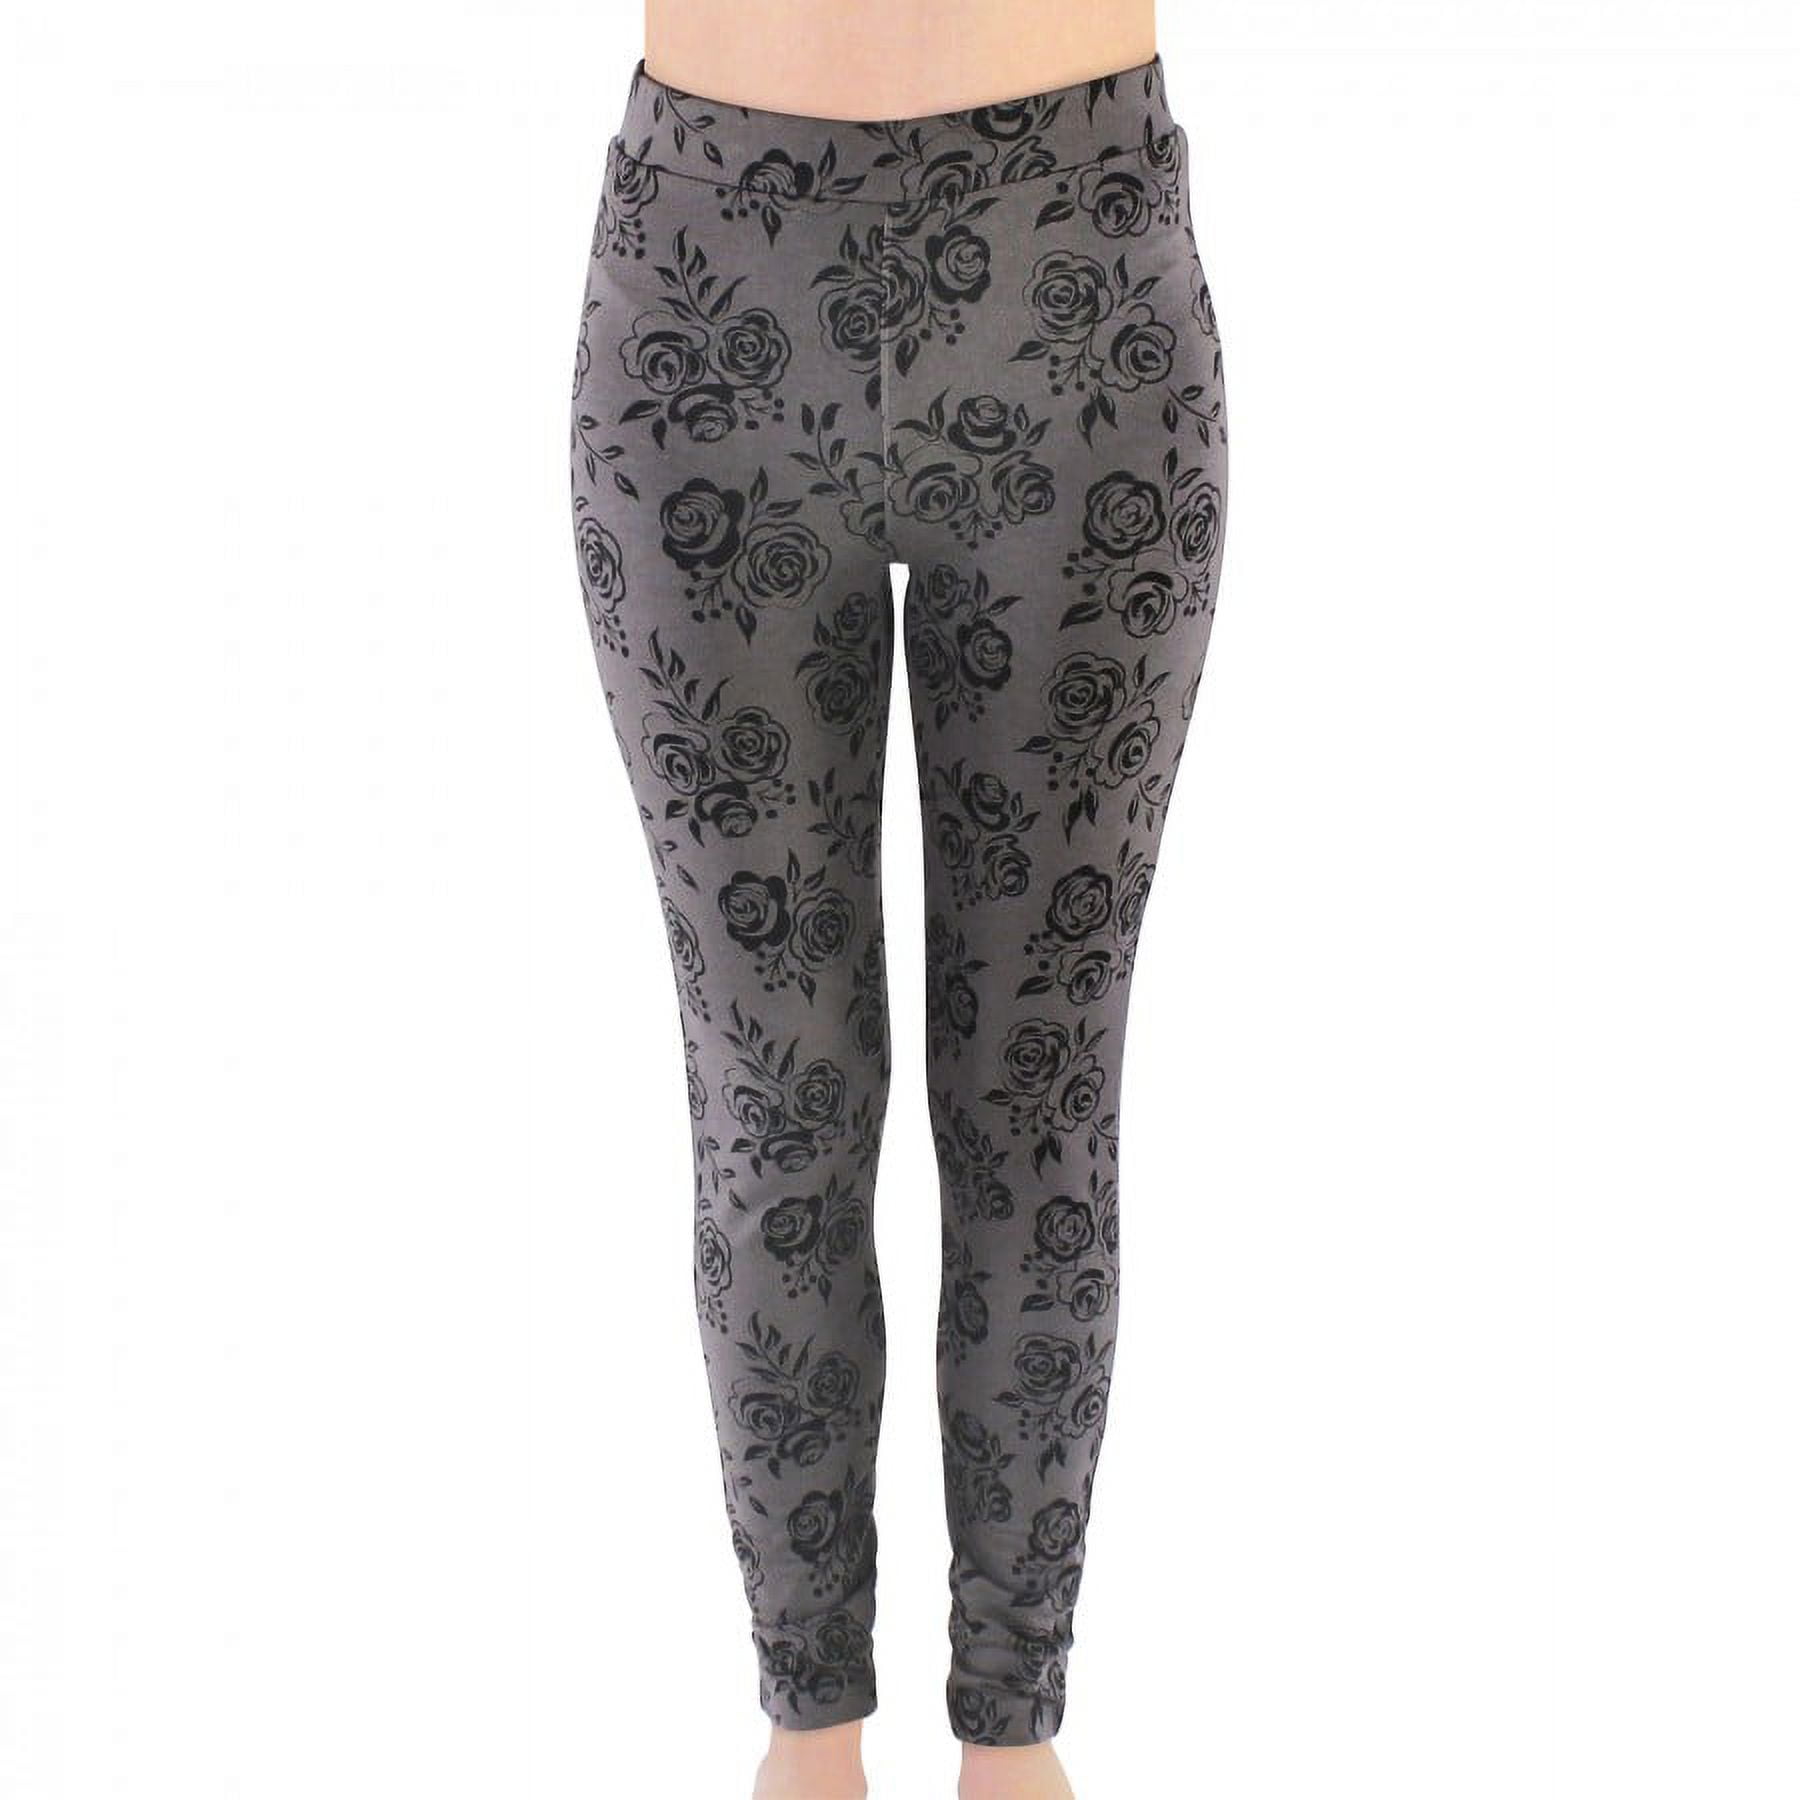 Touched by Nature Womens Organic Cotton Leggings, Black Floral